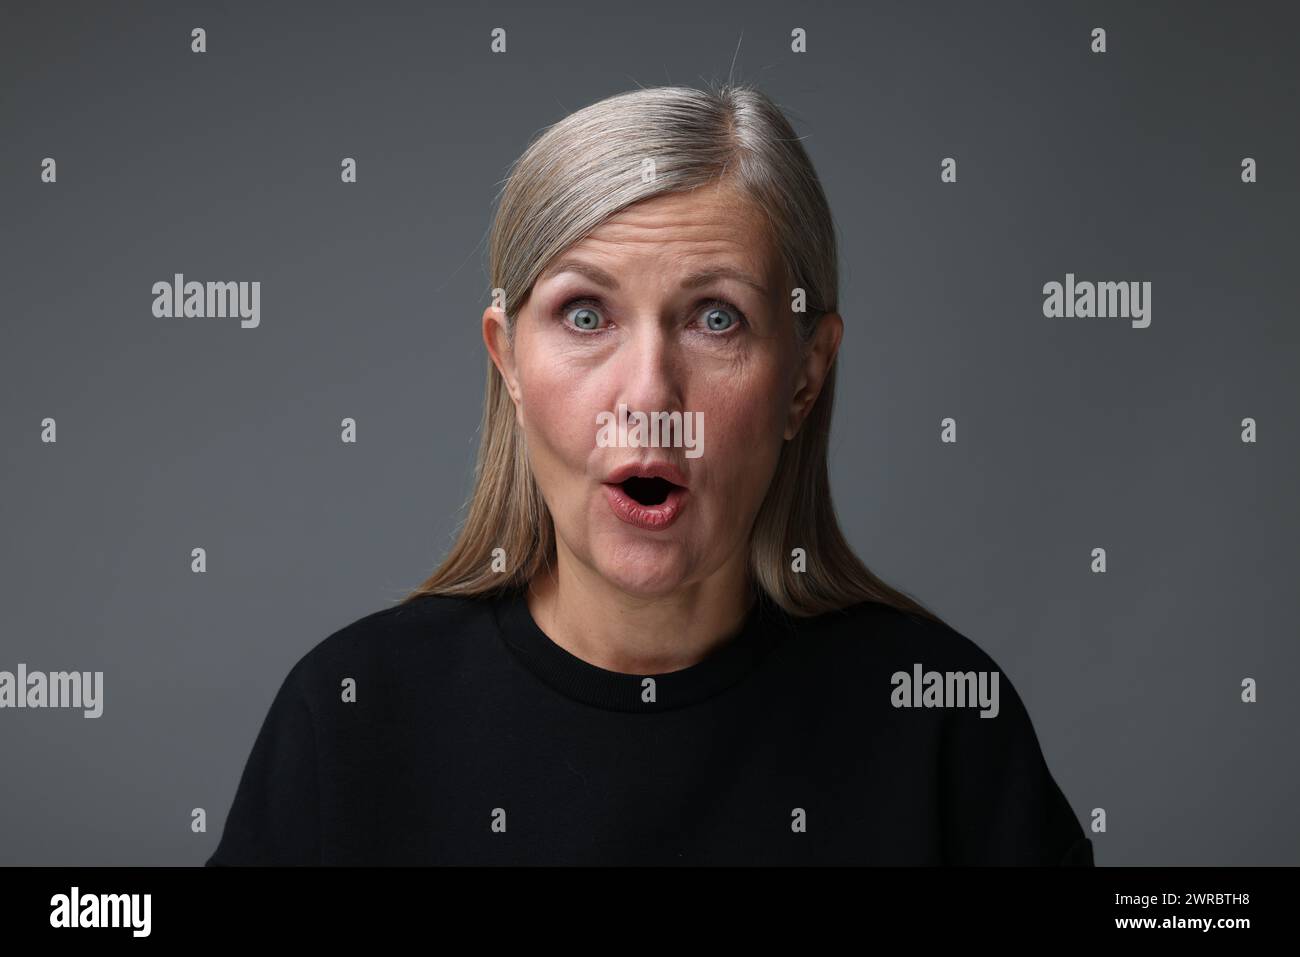 Personality concept. Portrait of emotional woman on gray background Stock Photo